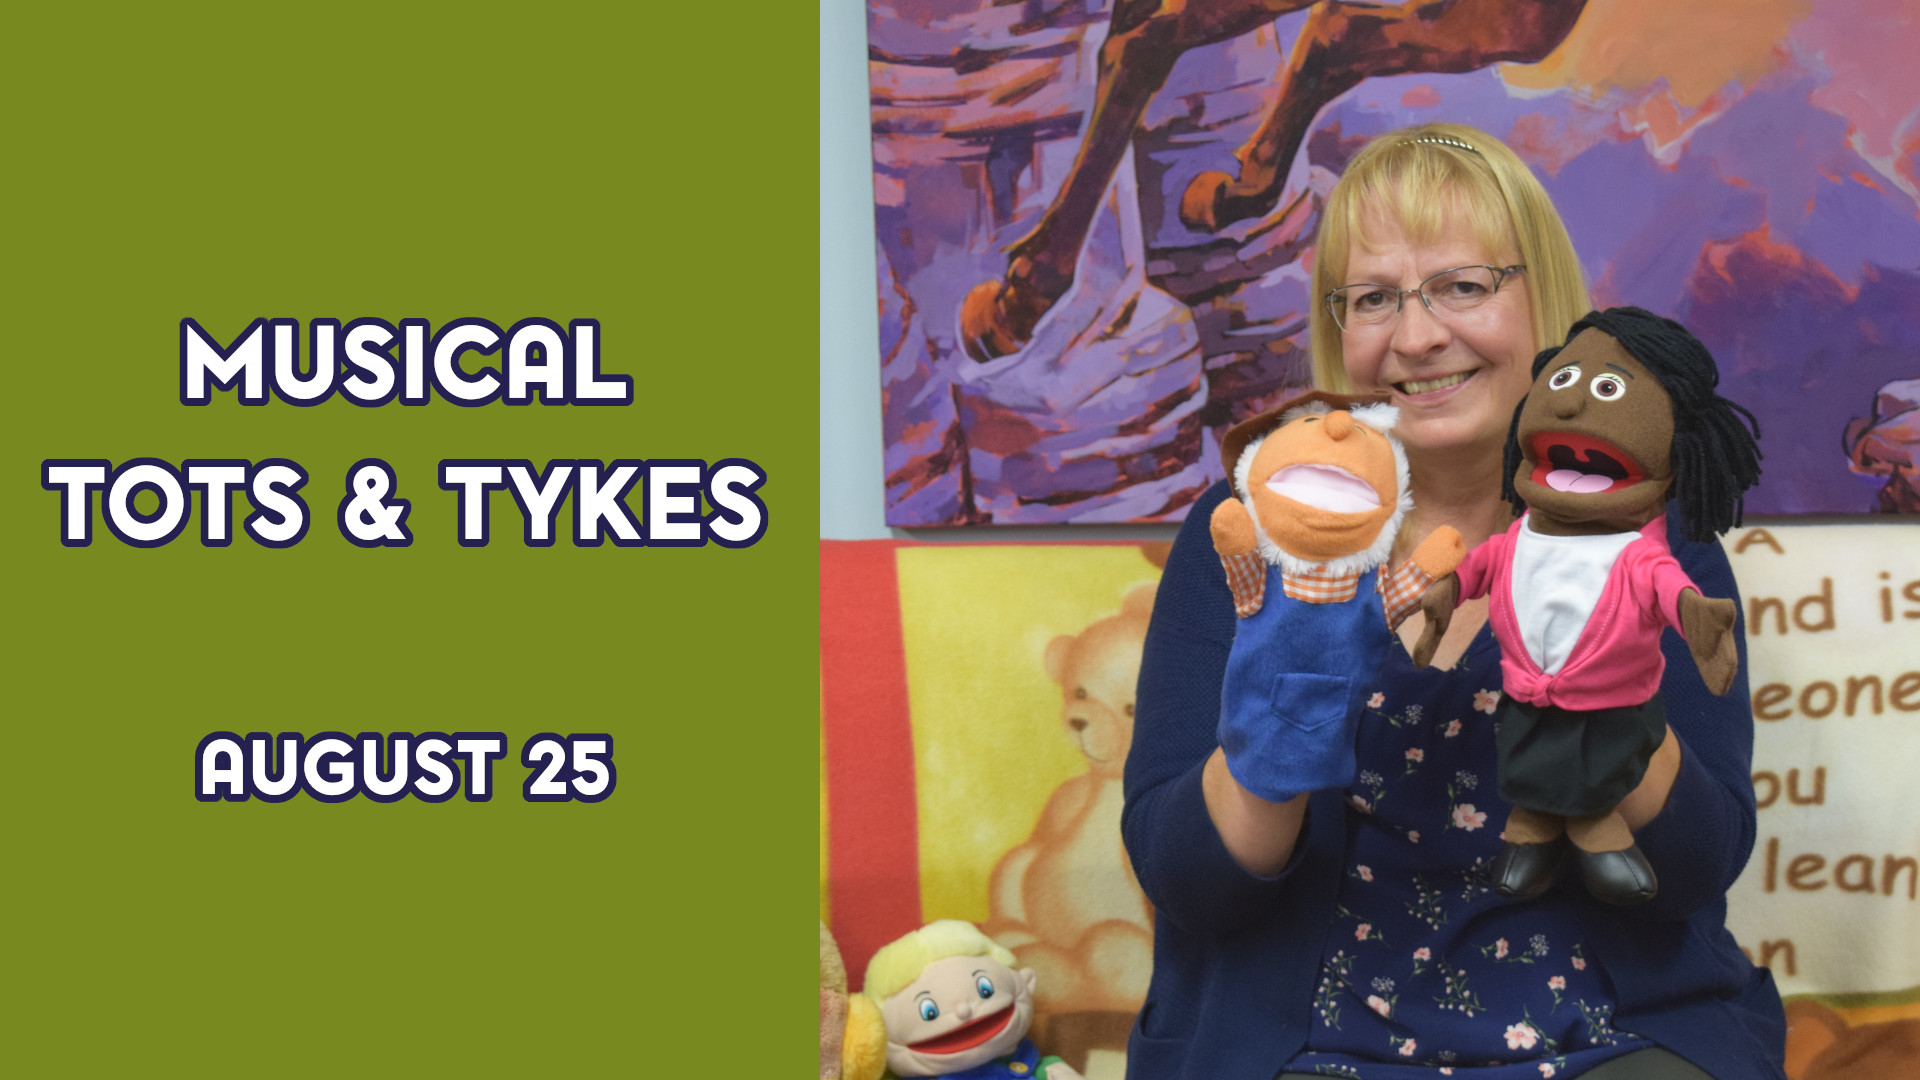 A woman holds puppets next to the text "Musical Tots & Tykes August 25"